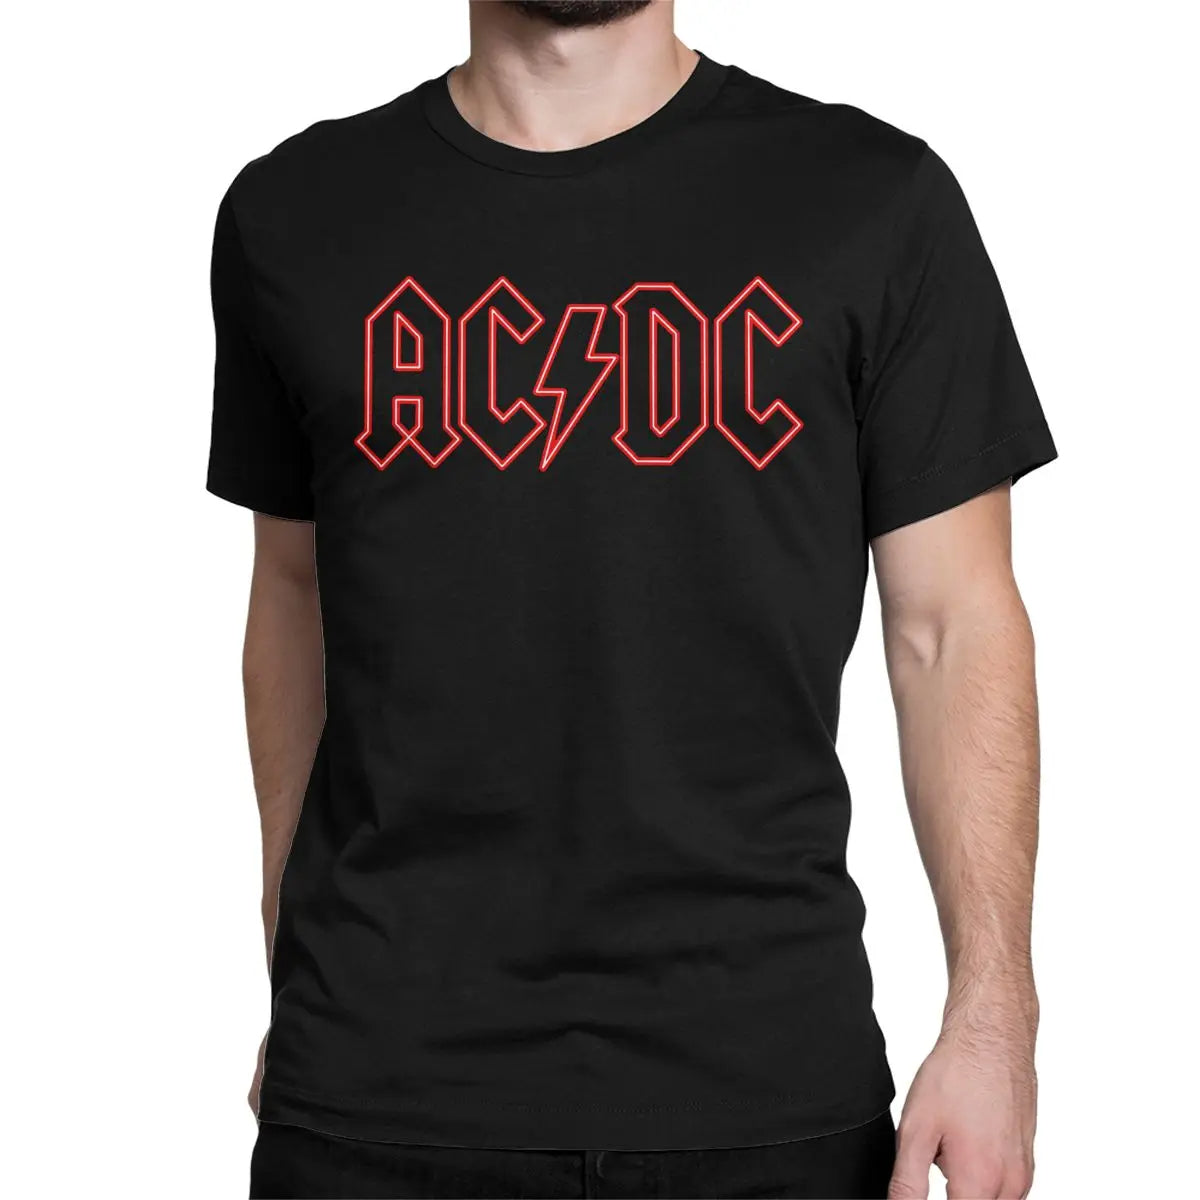 T-shirt ACDC